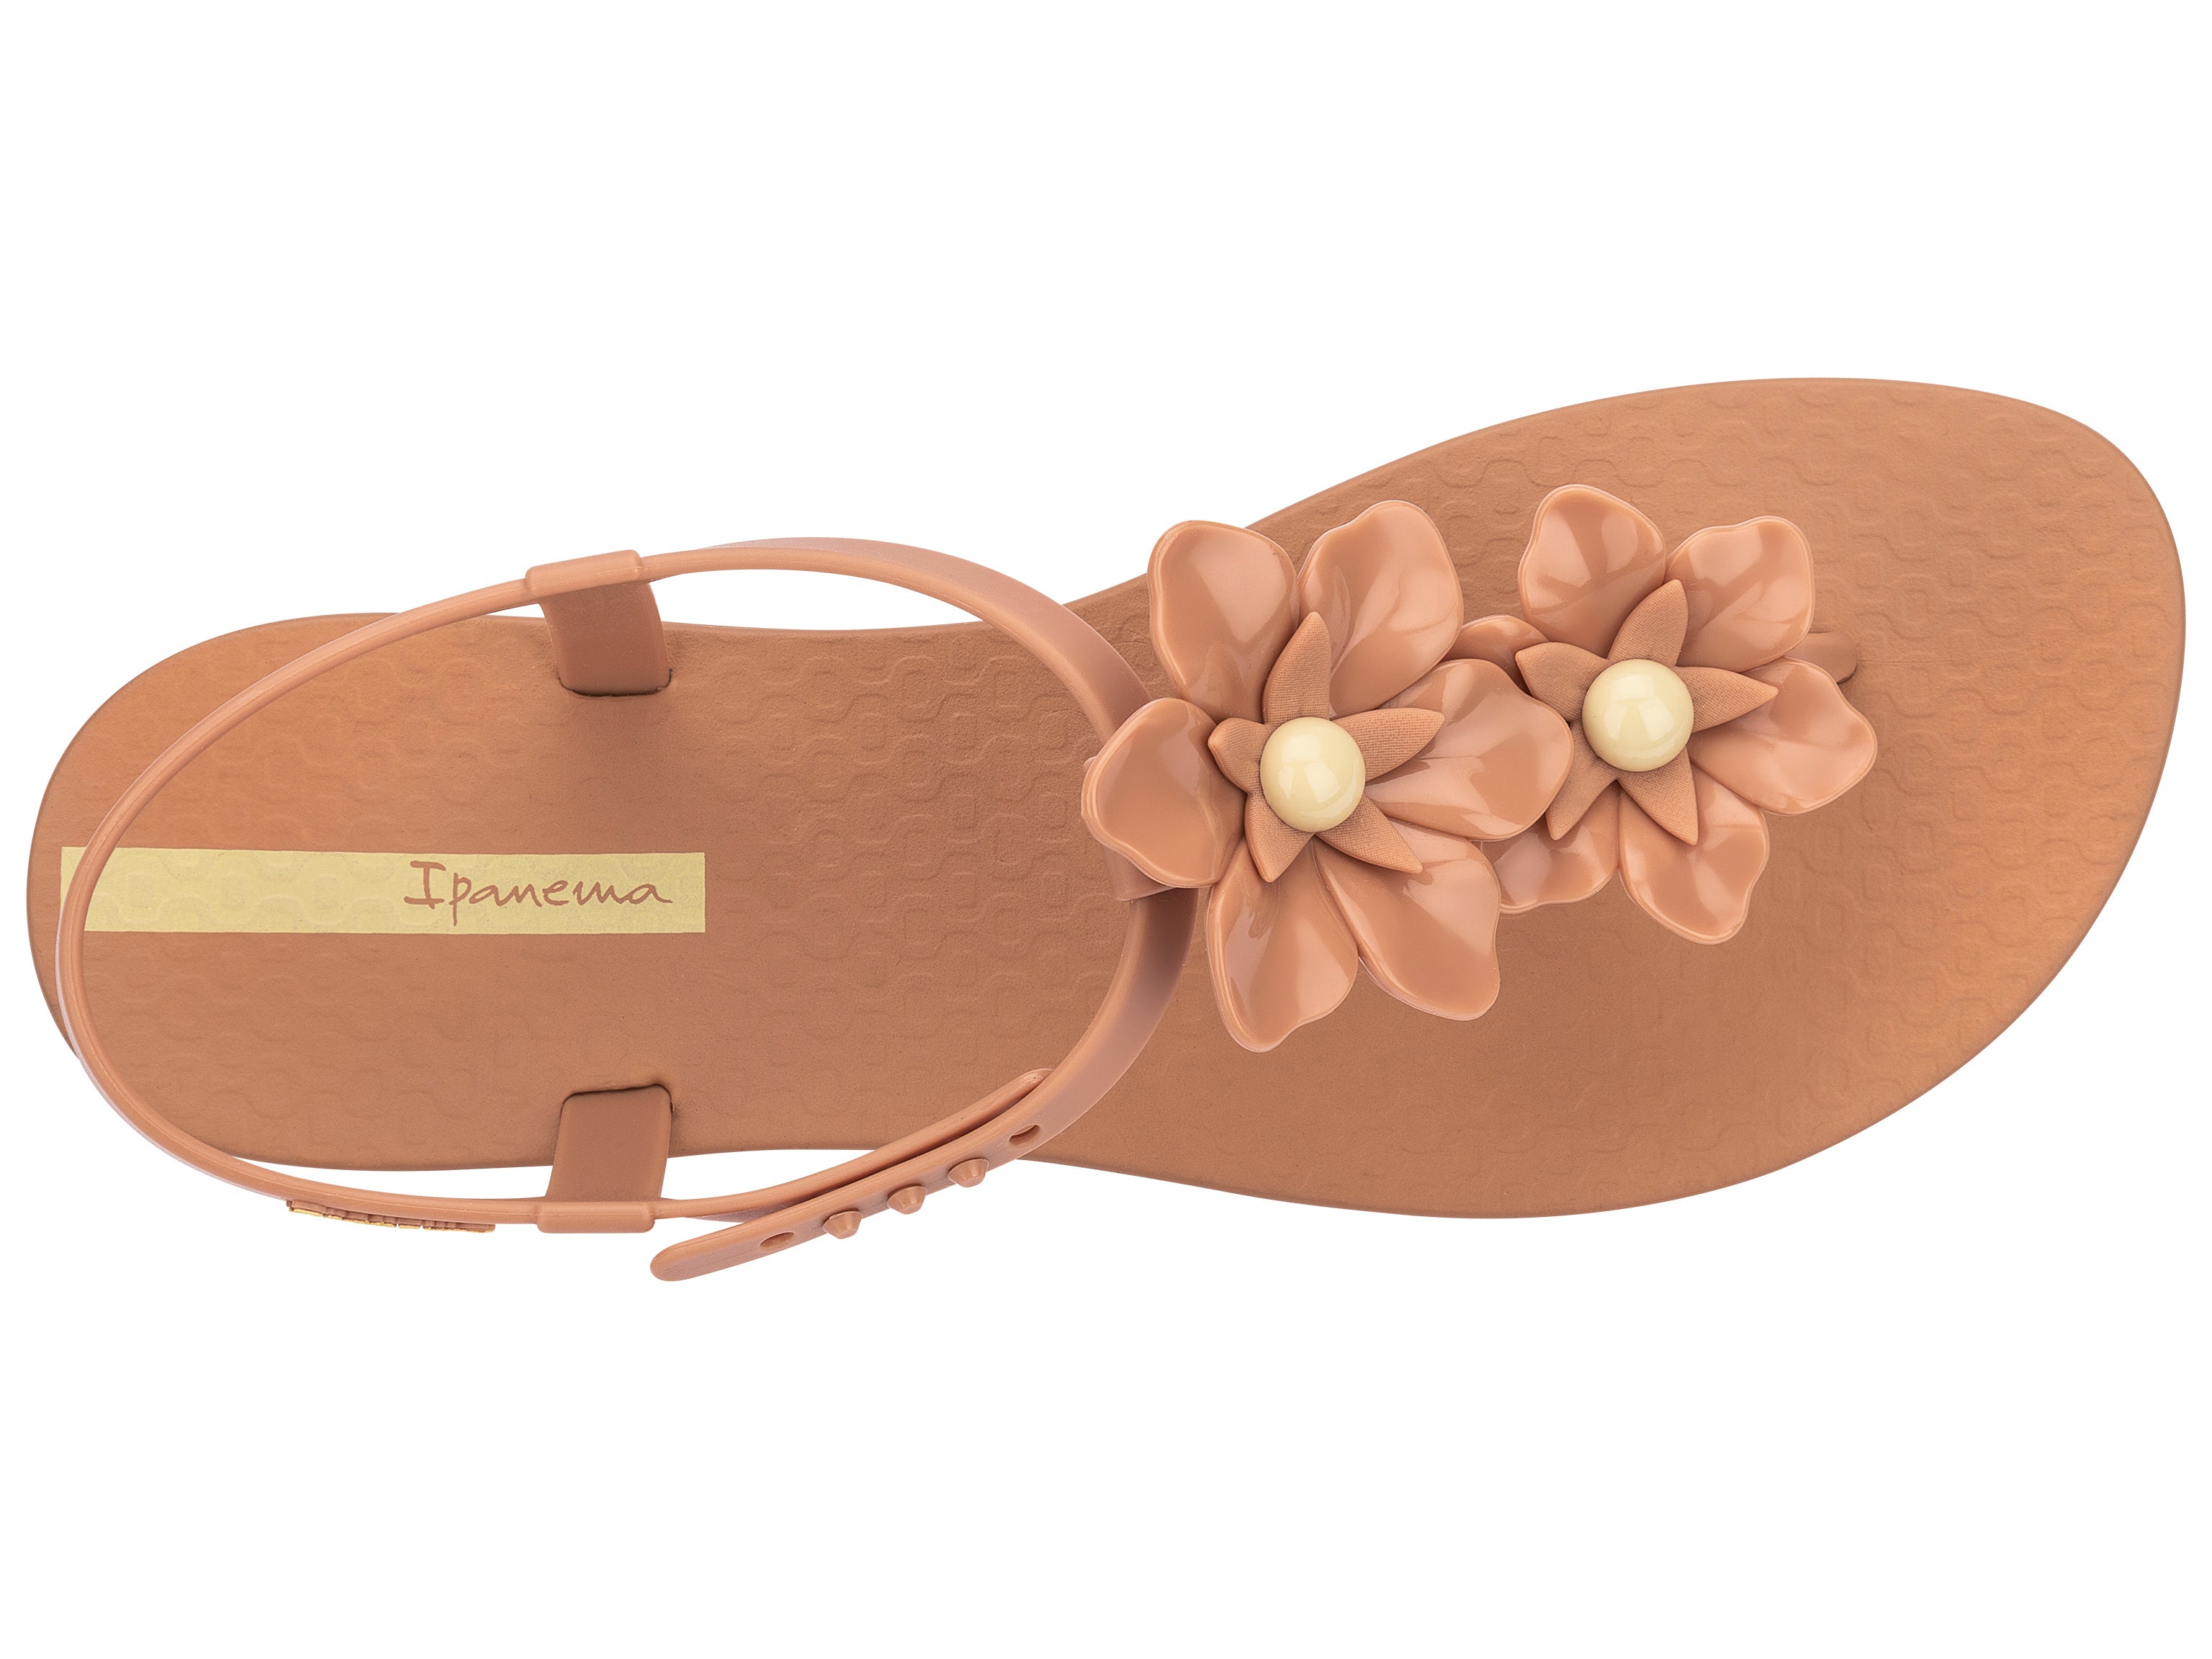 Top view of a brown Ipanema Duo Flowers women's t-strap sandal with two flowers.